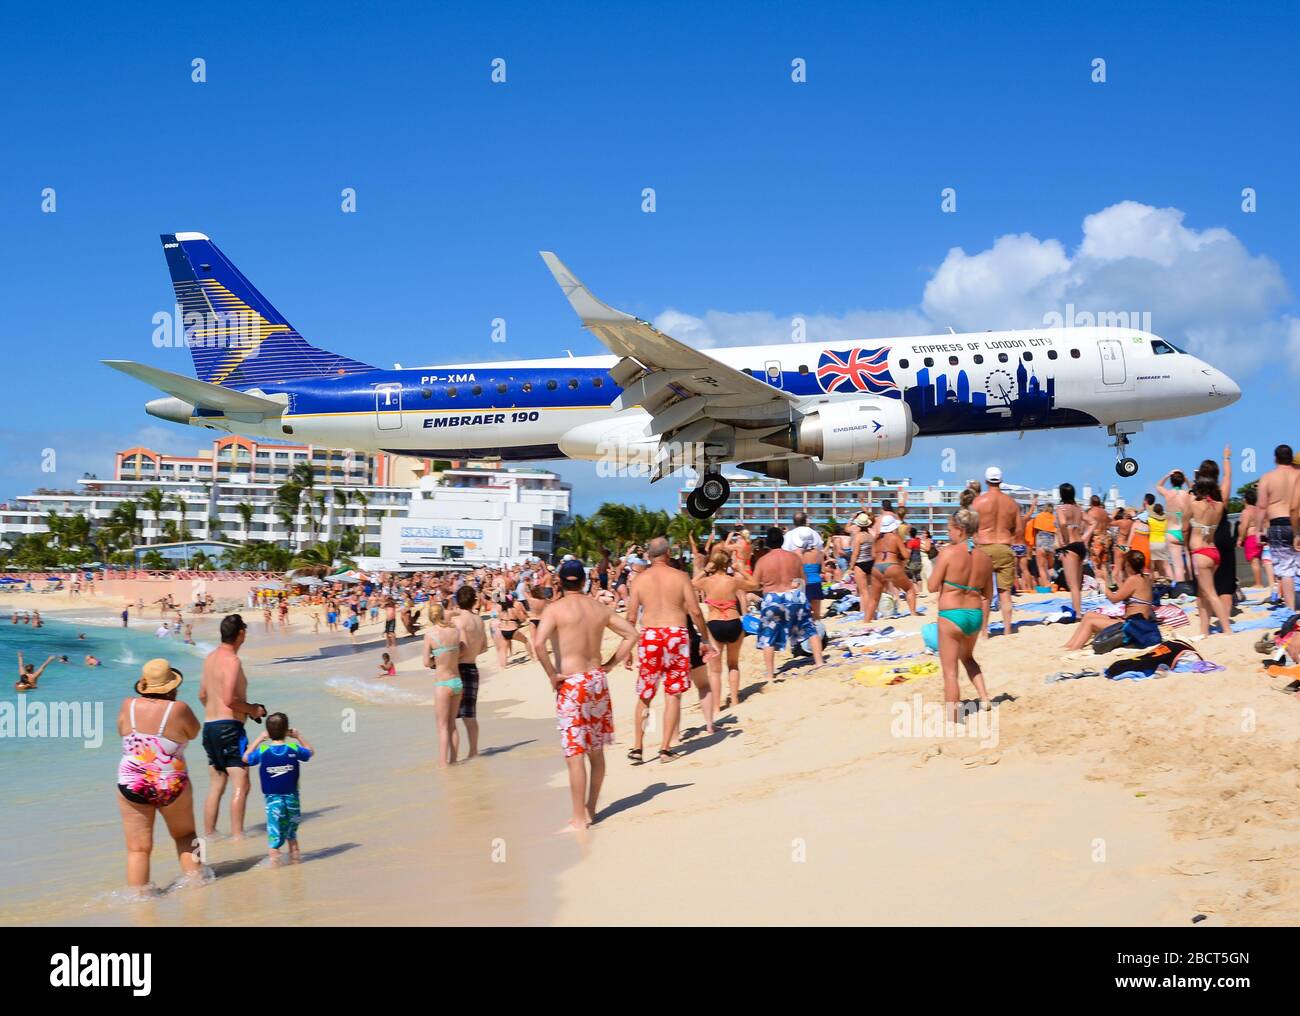 Embraer 190 (E190) extreme low approach to St. Maarten Airport over Maho Beach. ERJ-190 aircraft for flight tests. Tourist attraction in St. Martin. Stock Photo